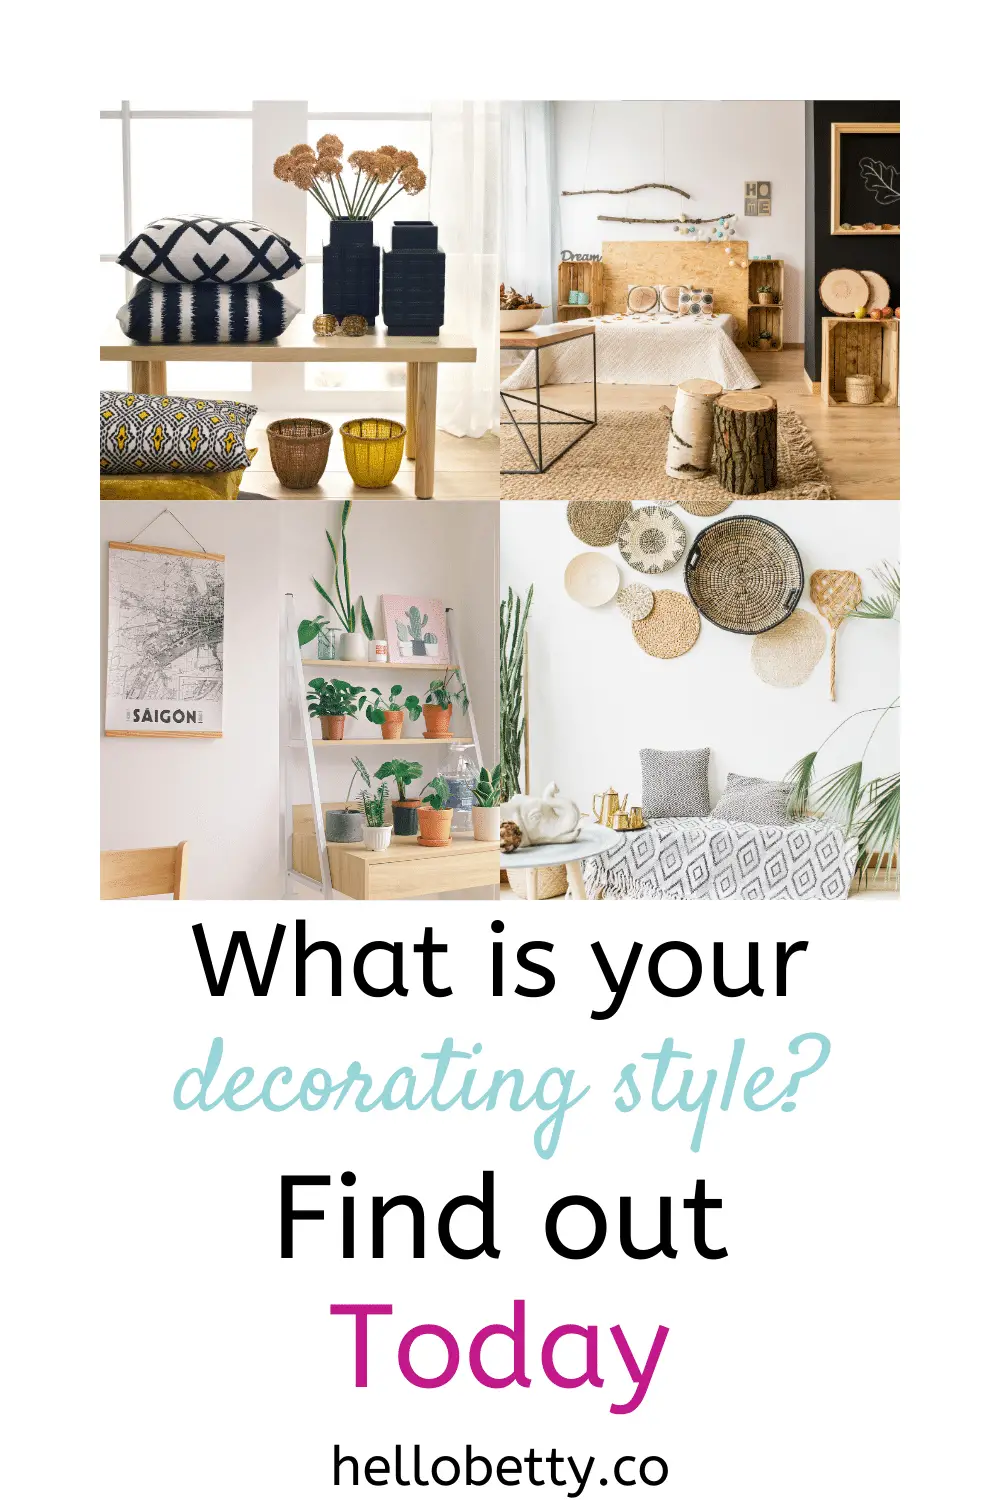 What is your decorating style?